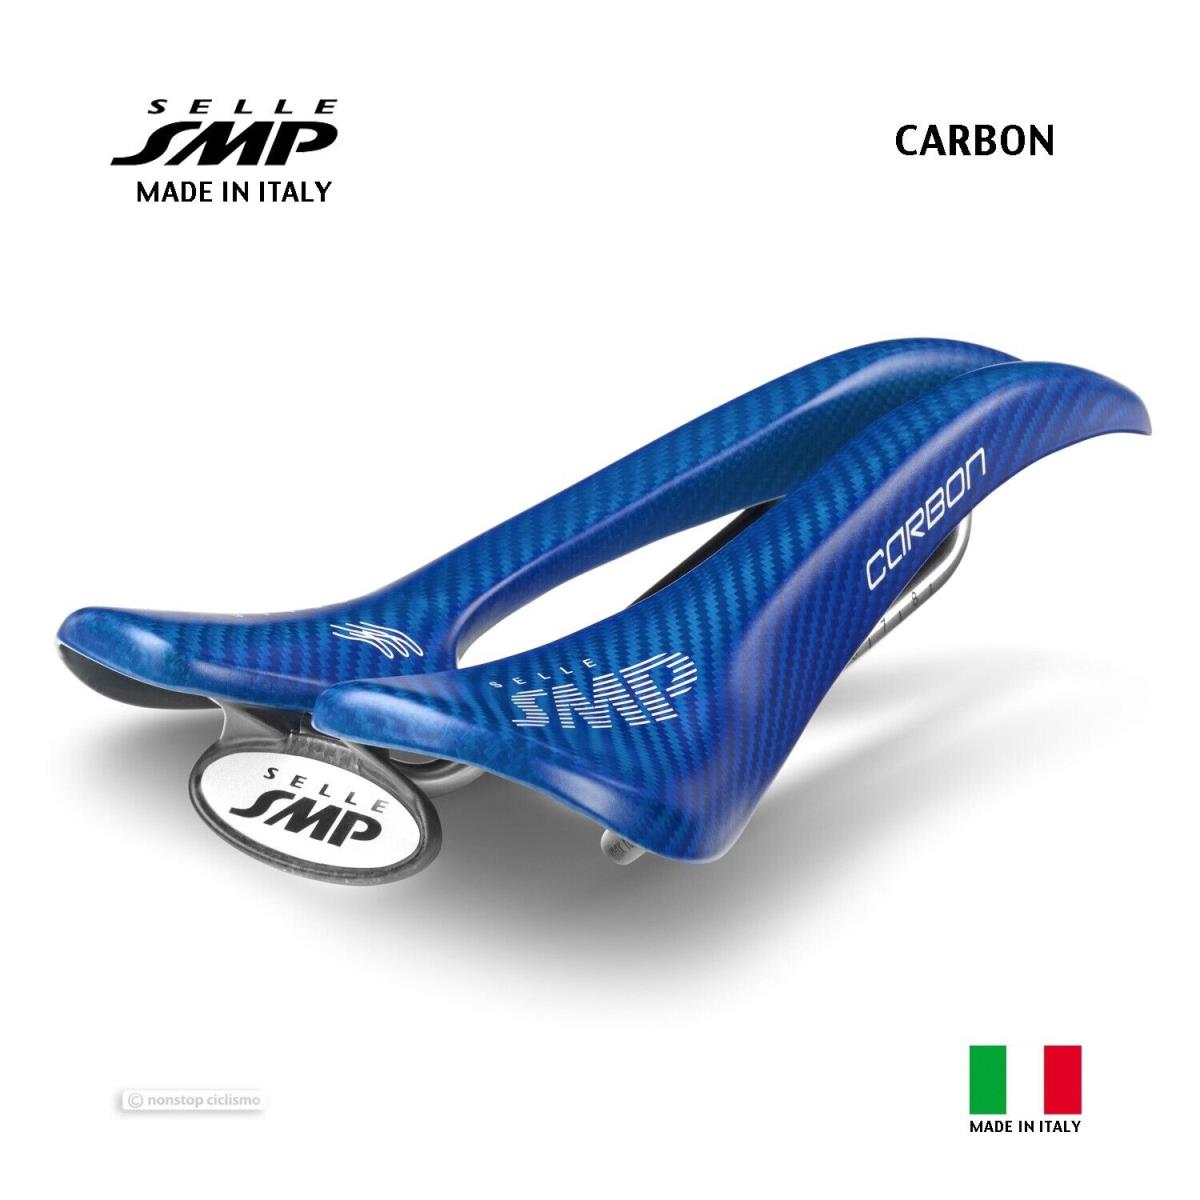 Selle Smp Carbon Saddle : Blue - Made IN Italy